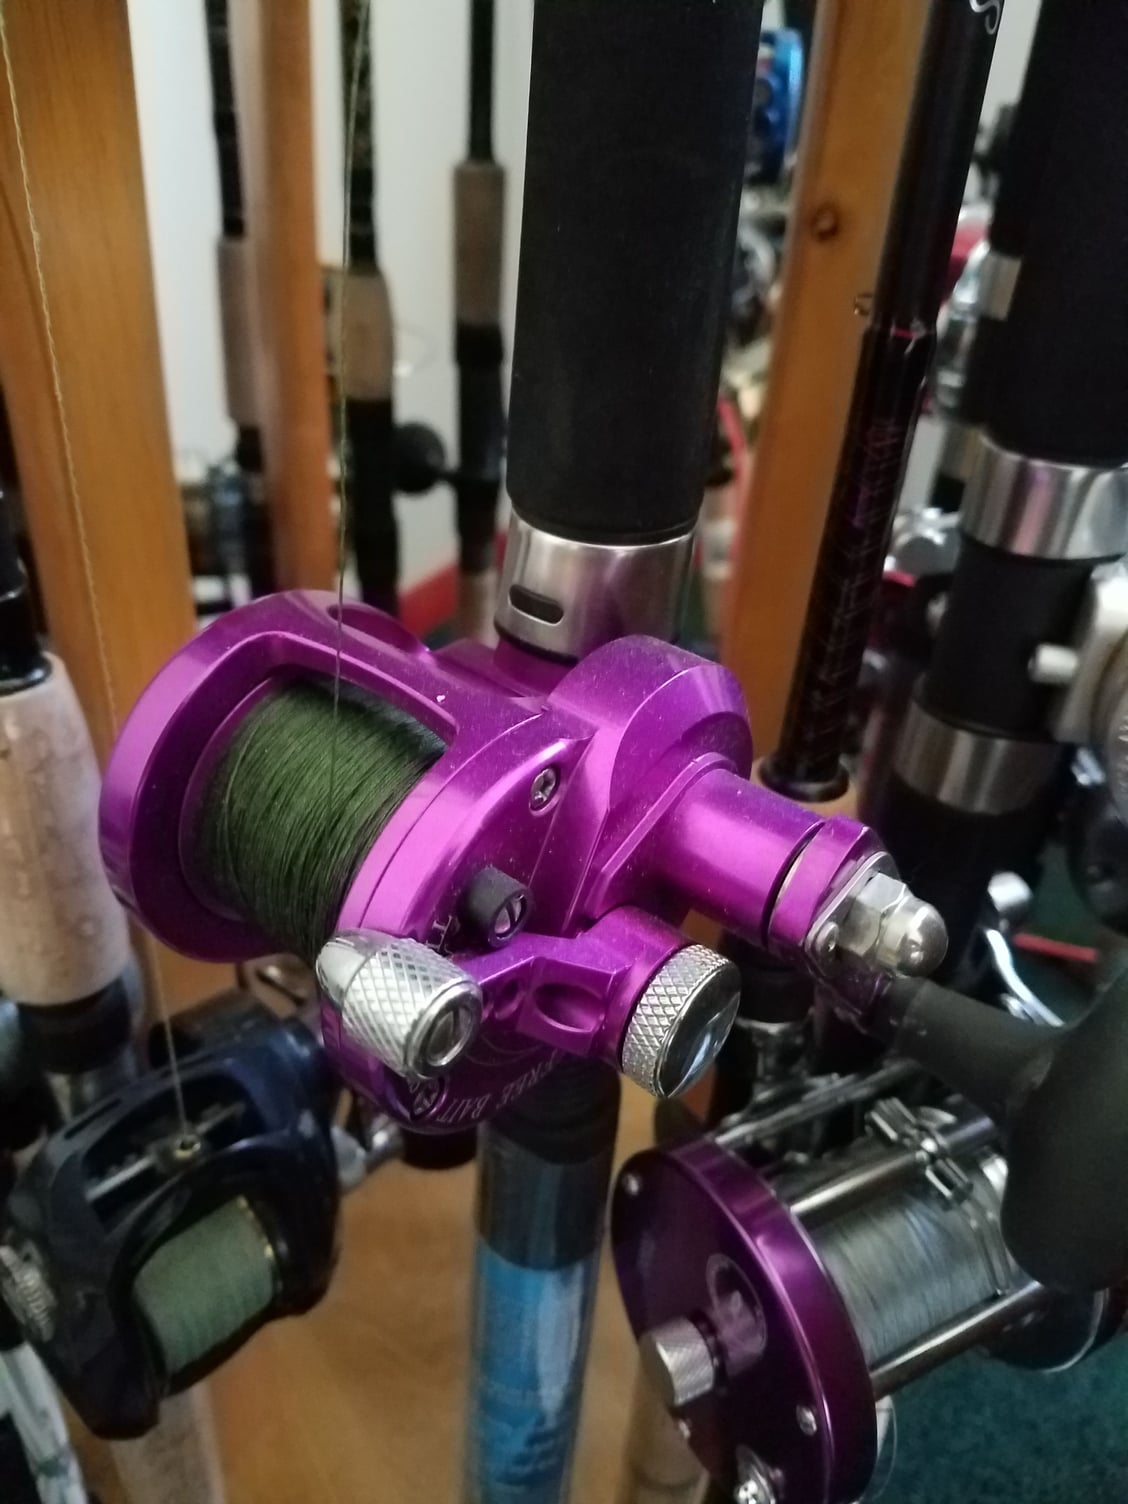 Avet sx 5.3 reels for sale - The Hull Truth - Boating and Fishing